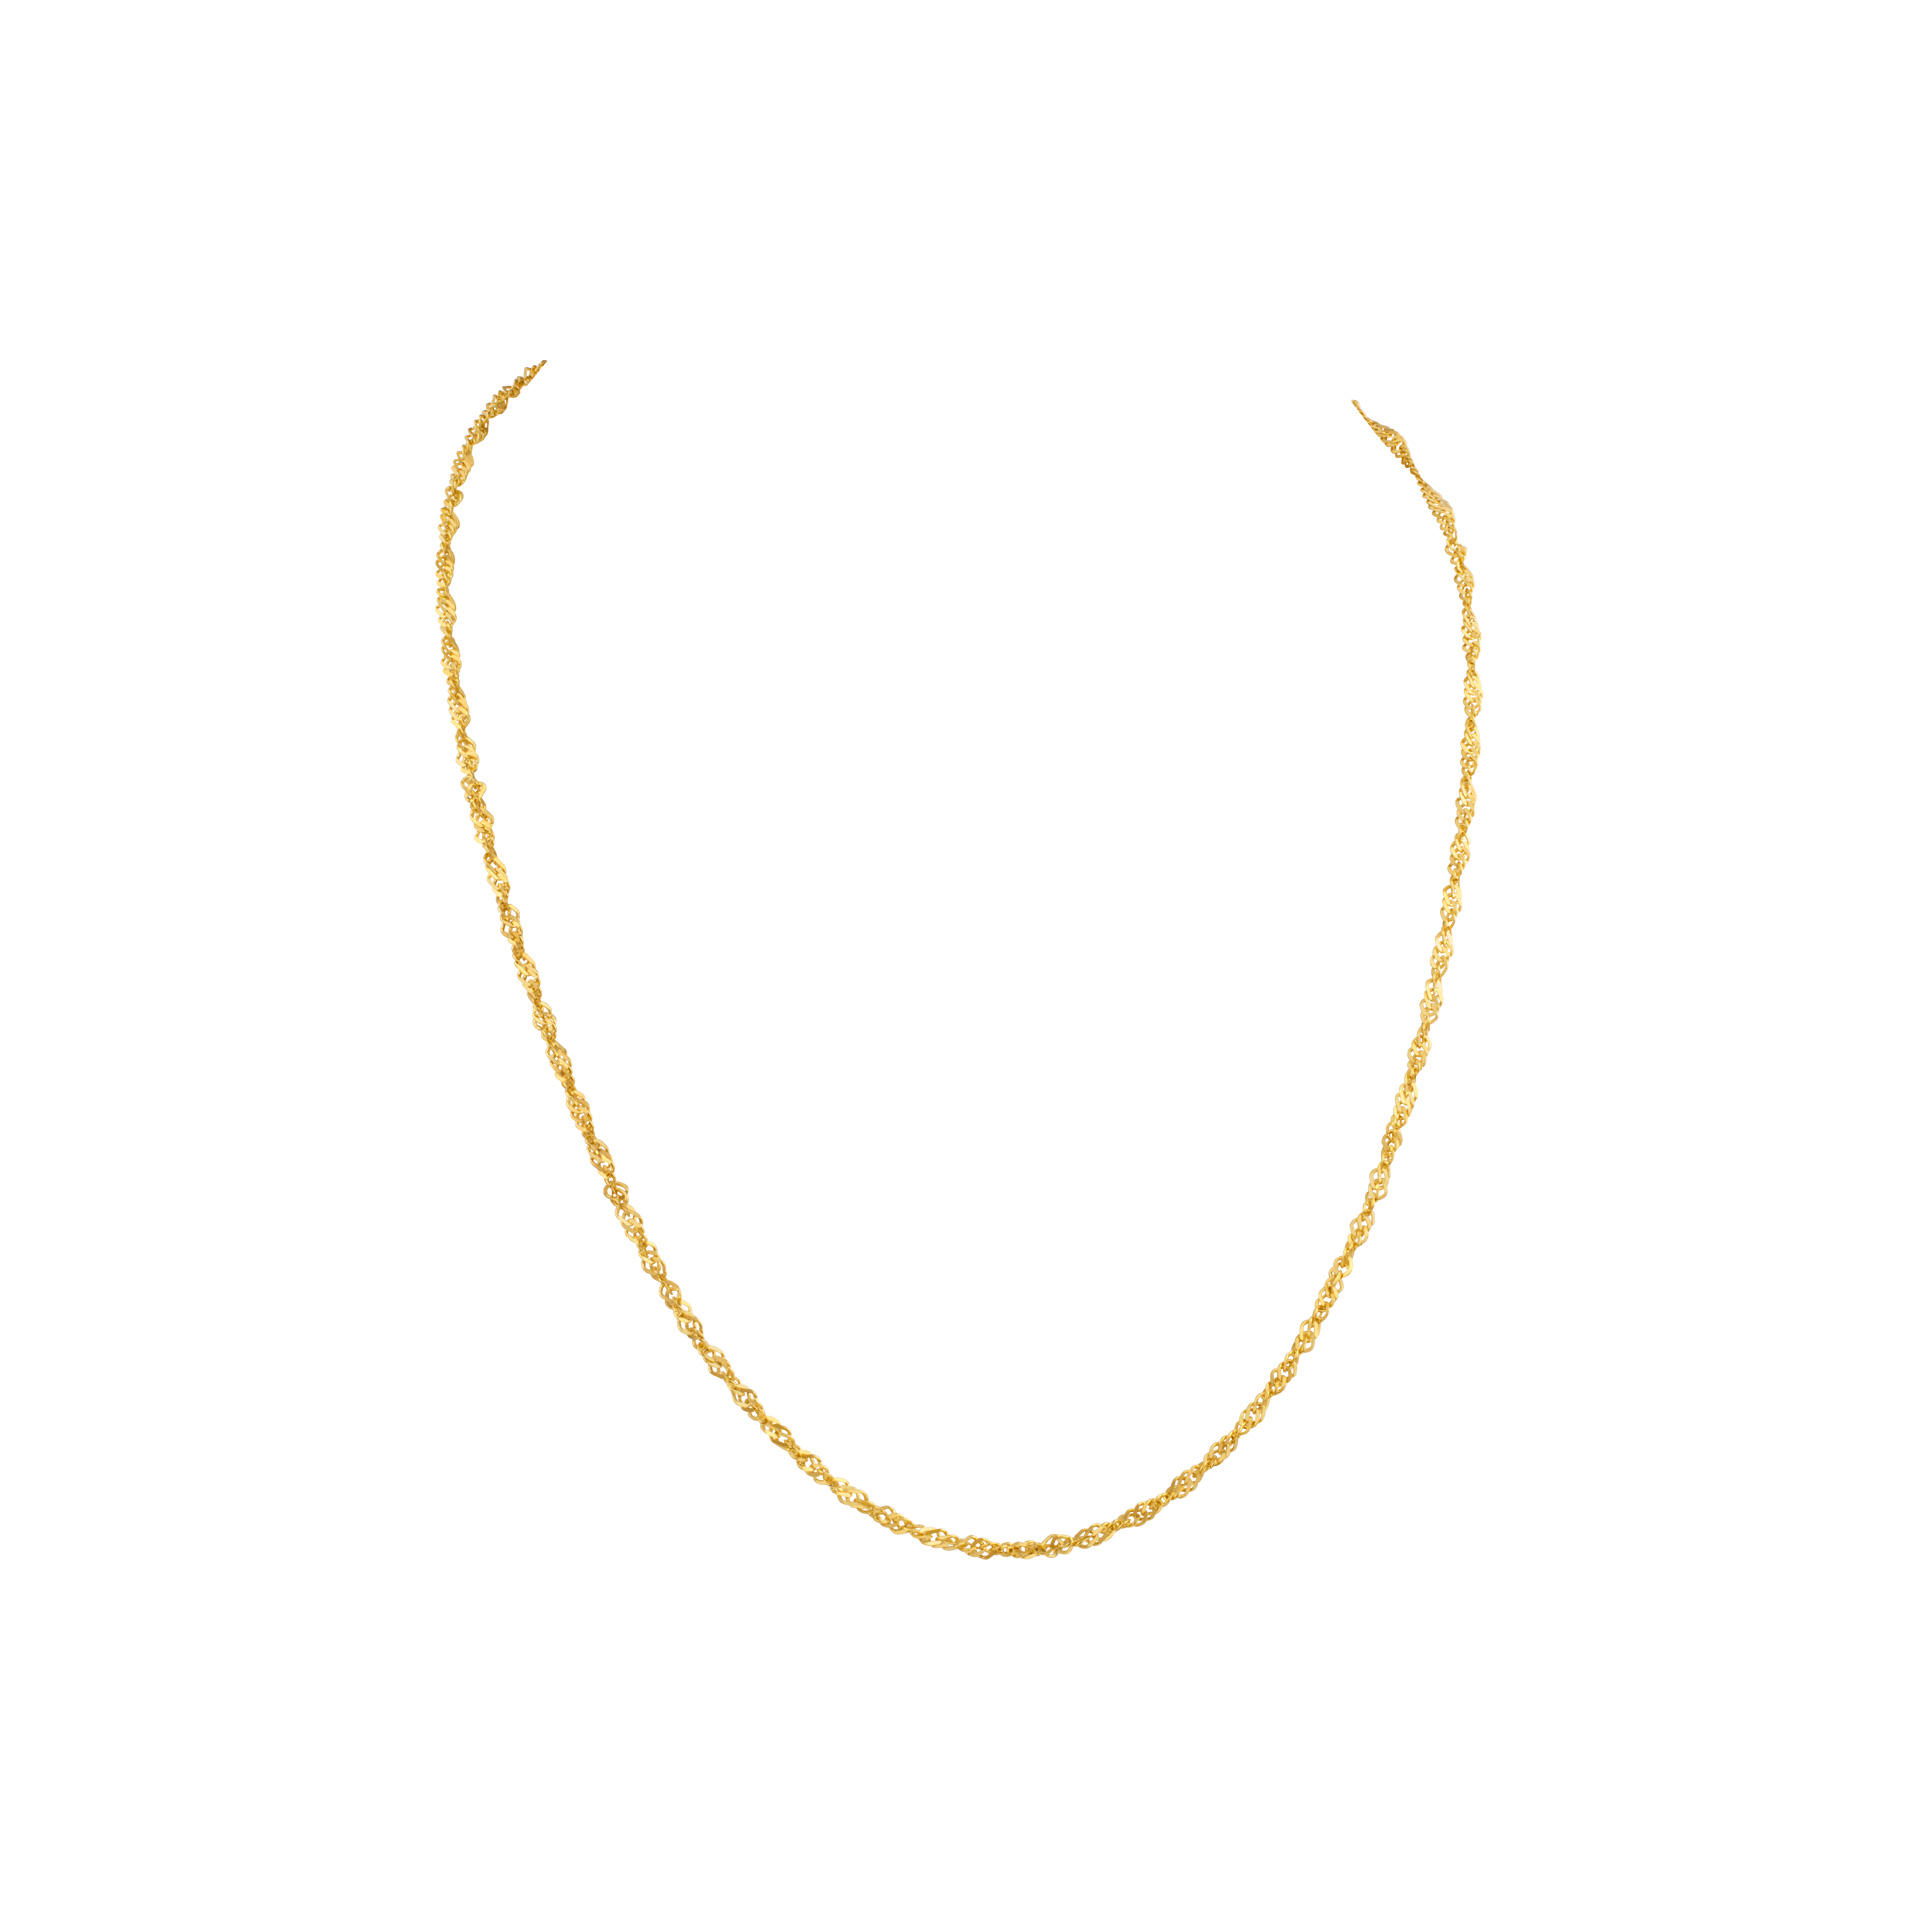 Shimmering 18k yellow gold chain. 17" long image 1